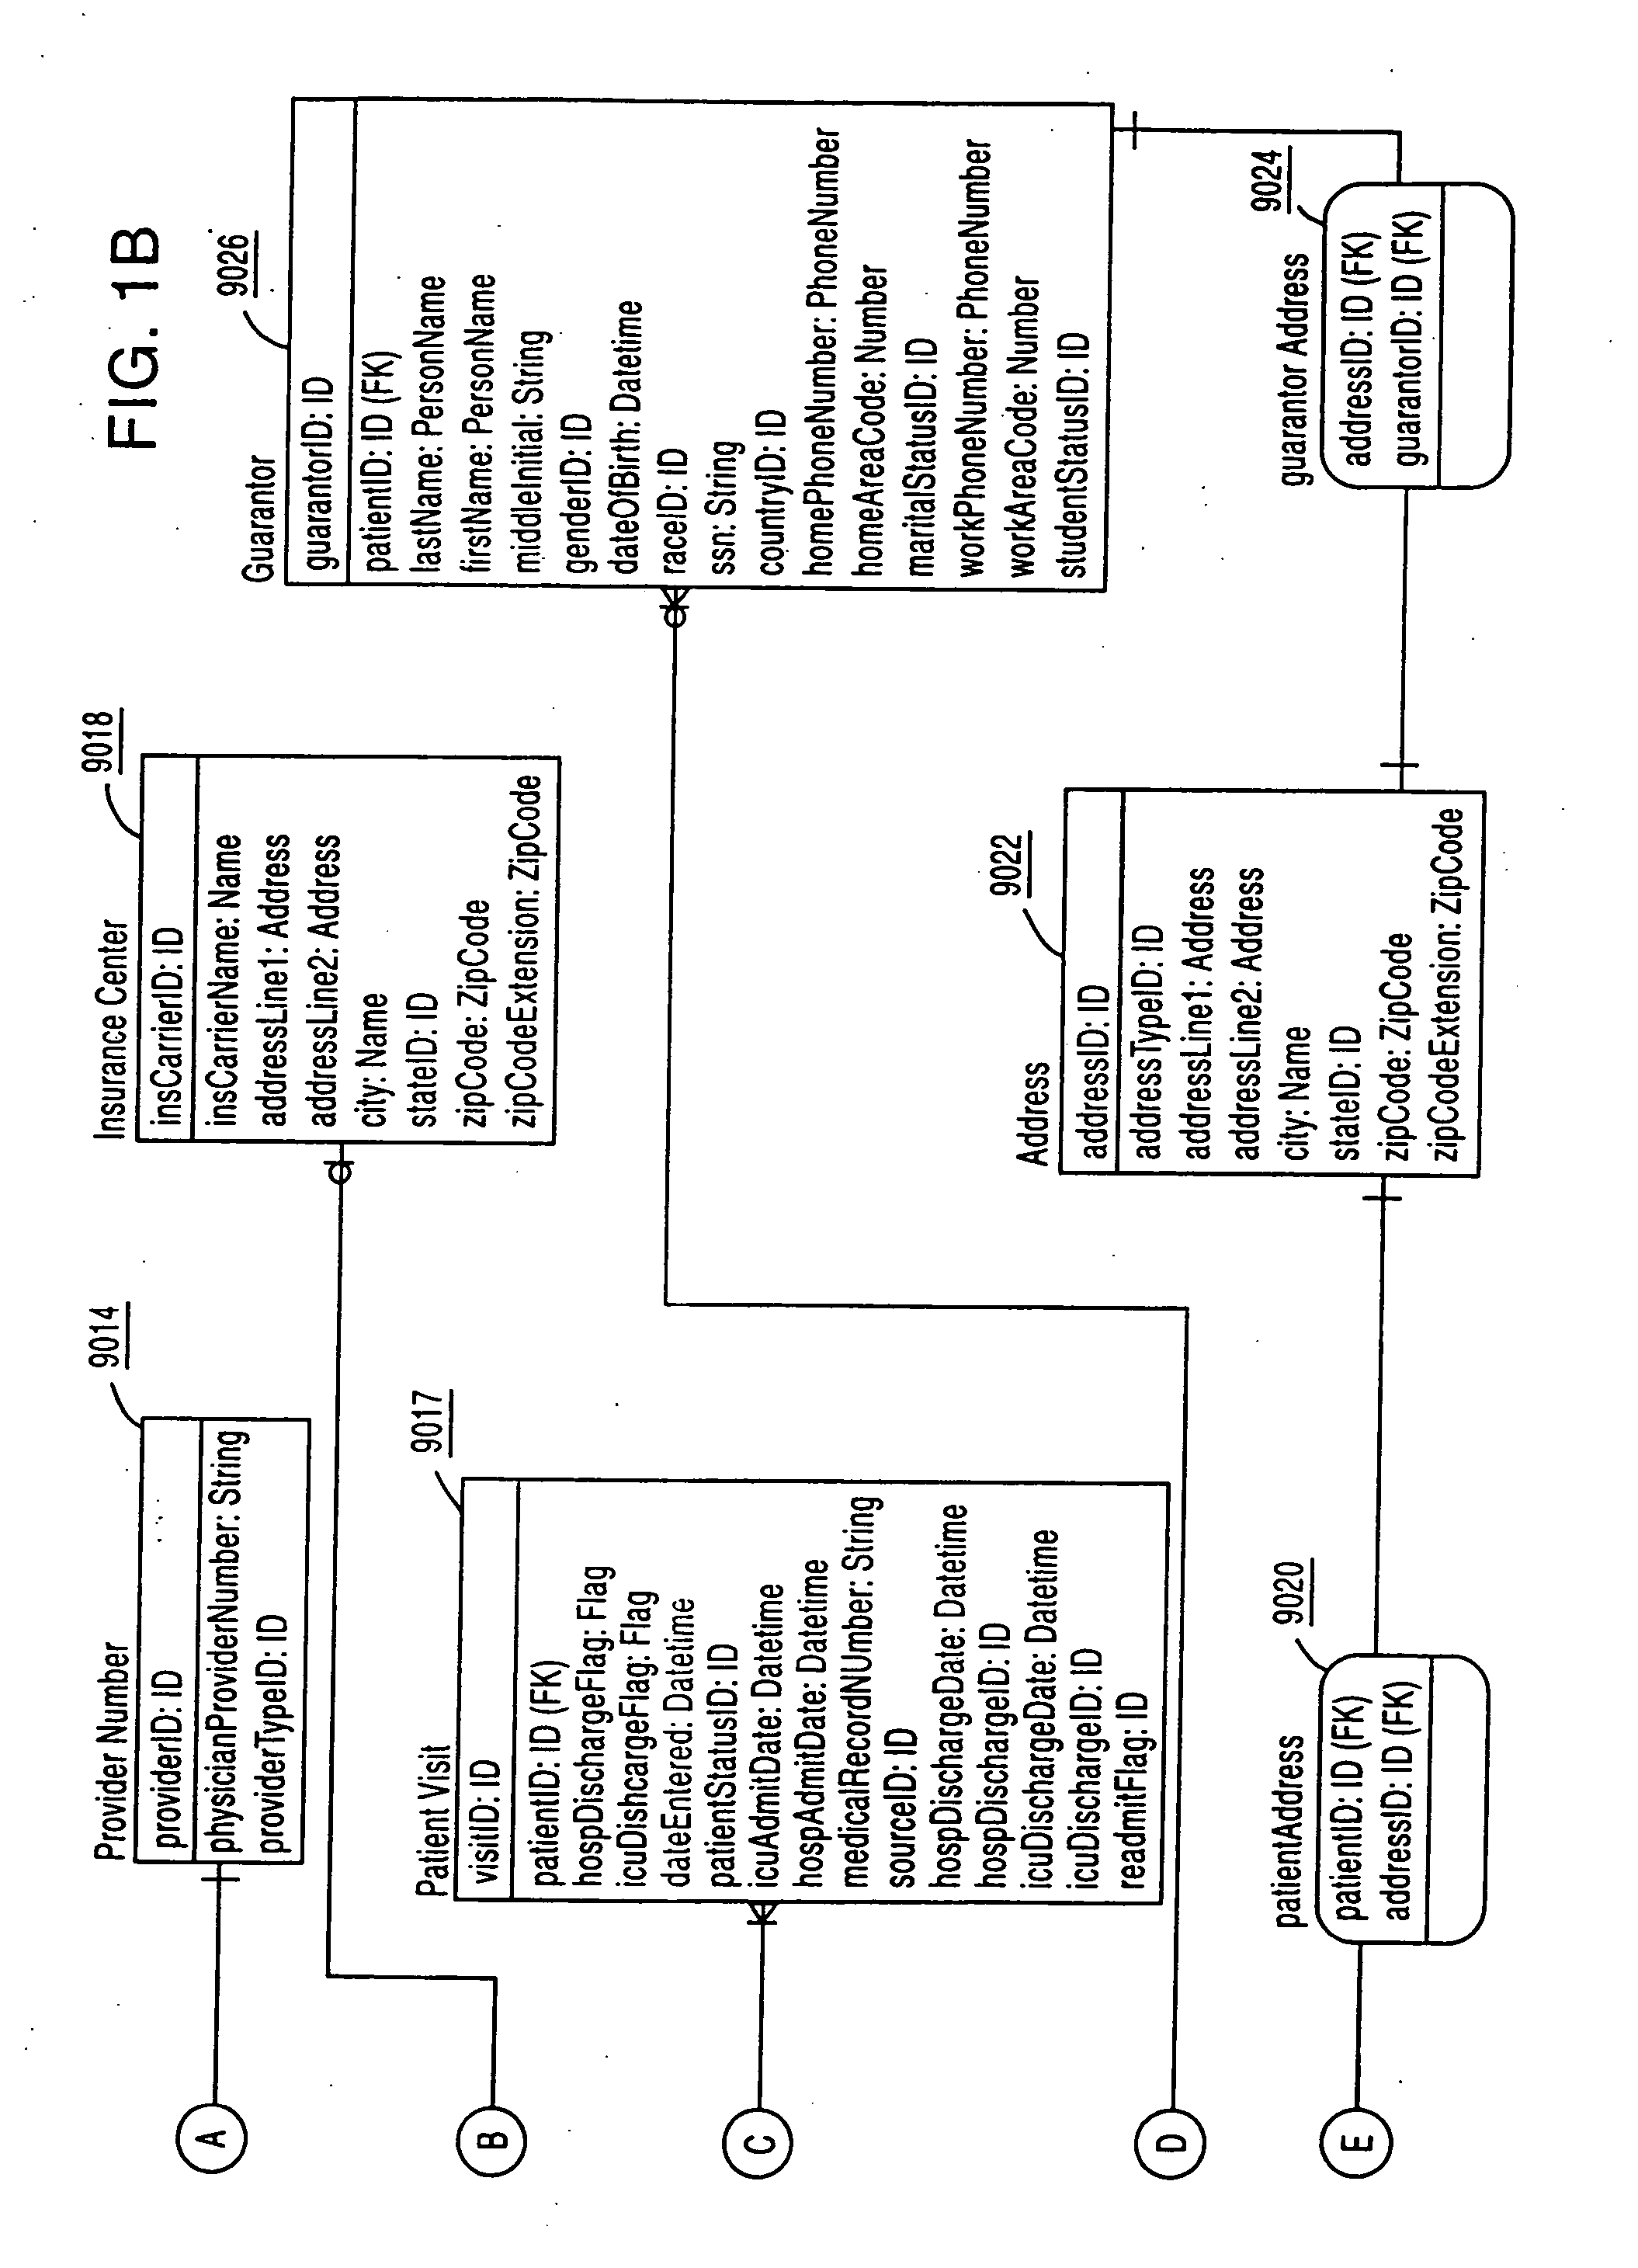 System and method for accounting and billing patients in a hospital environment